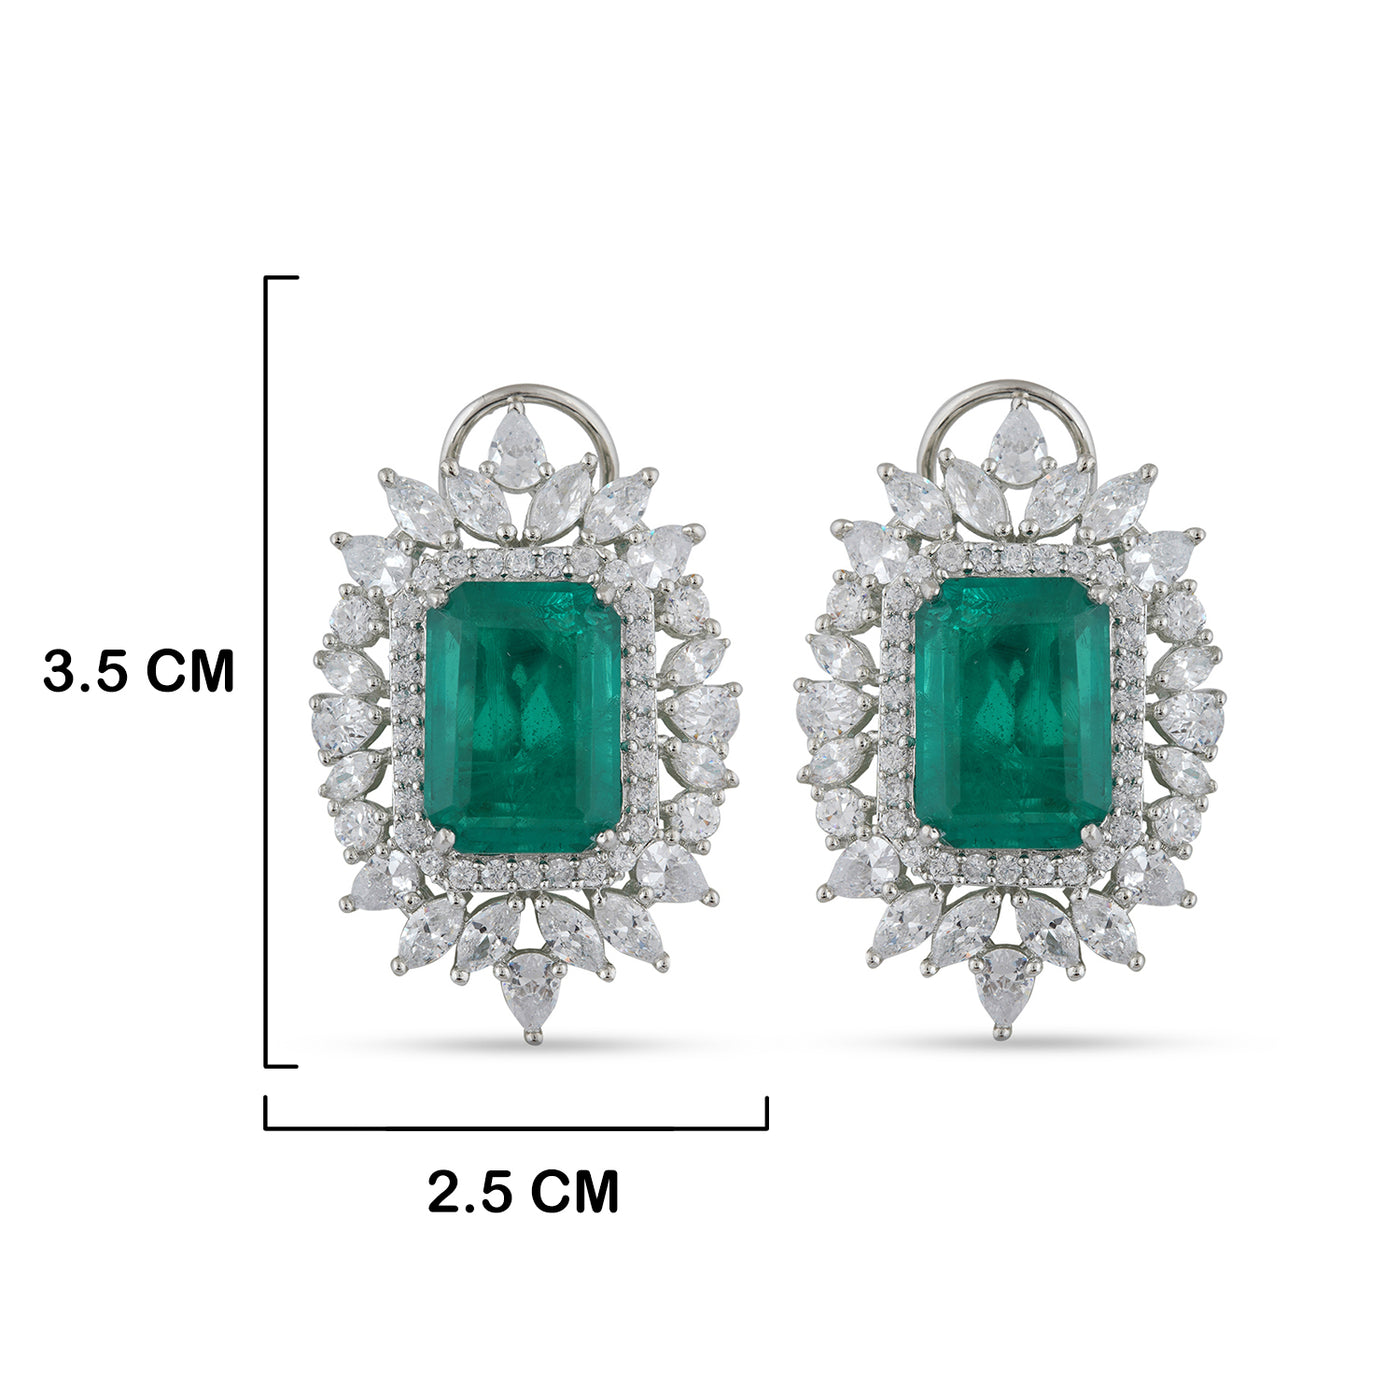 Green Stoned CZ Stud Earrings with measurements in cm. 3.5cm by 2.5cm.